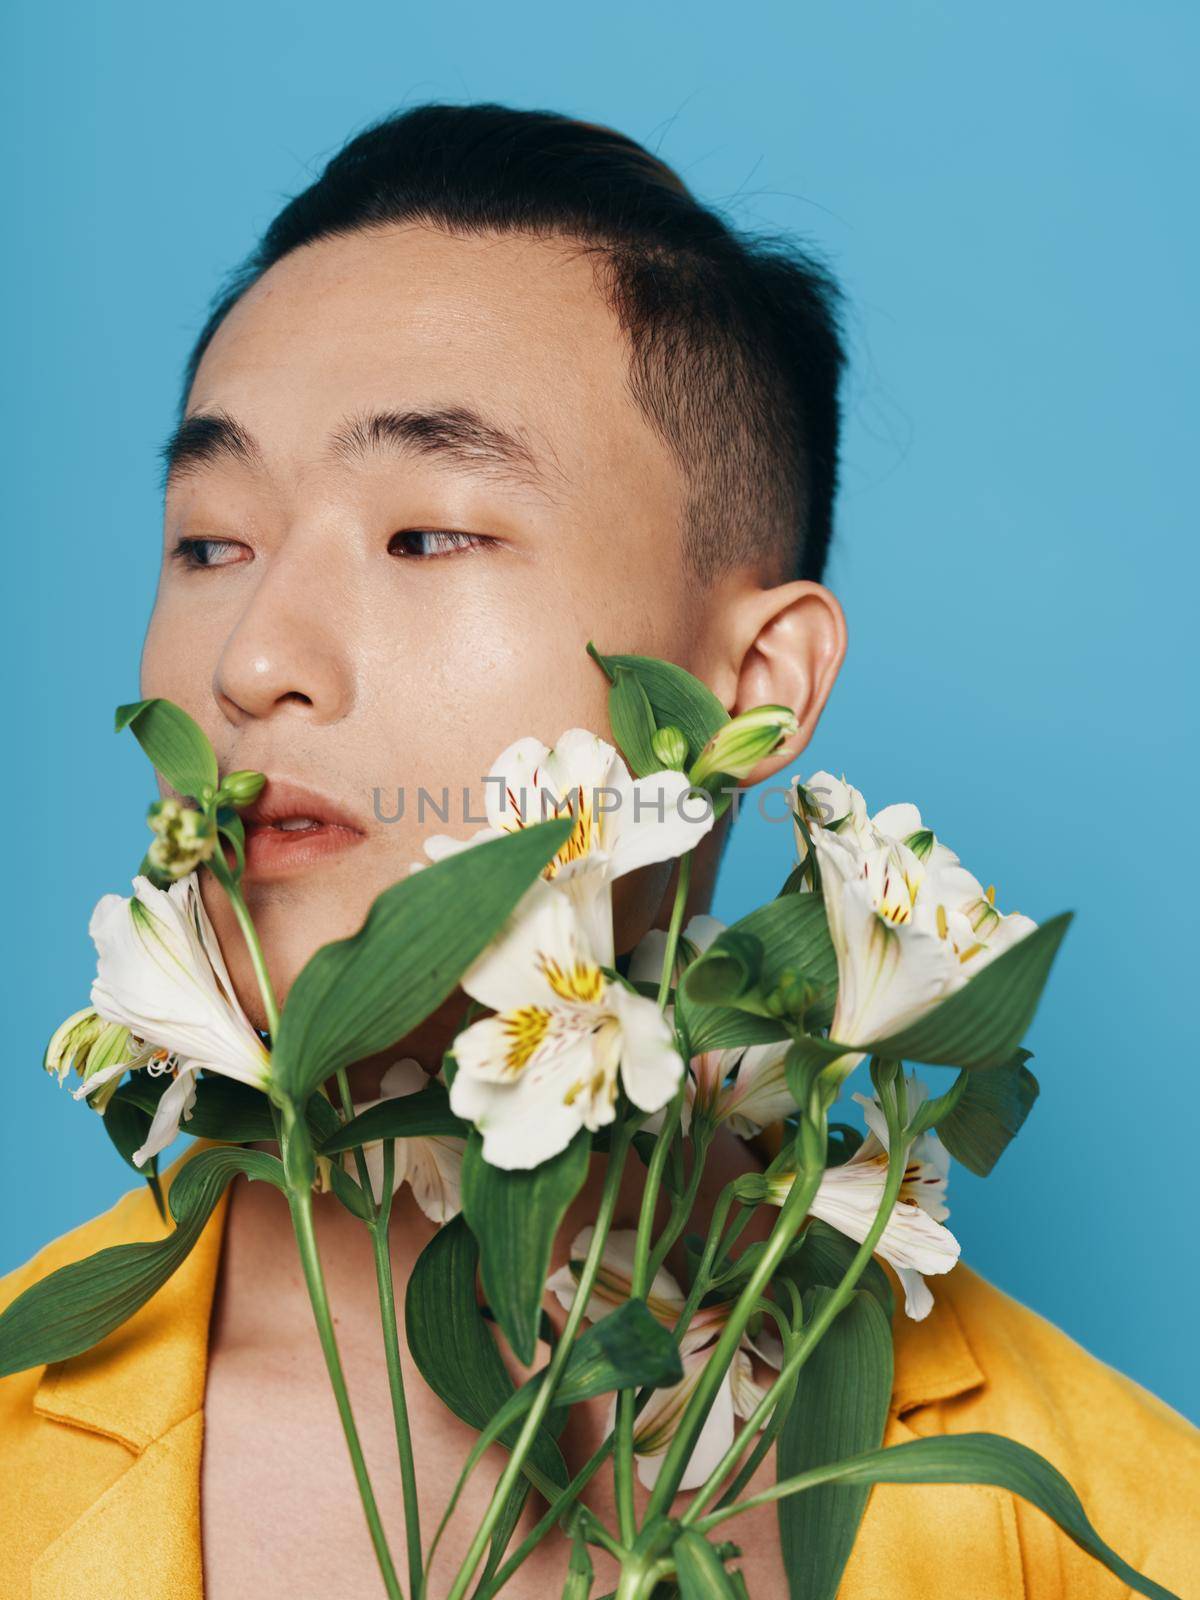 romantic asian guy with a bouquet of white flowers and in a yellow coat portrait close-up . High quality photo